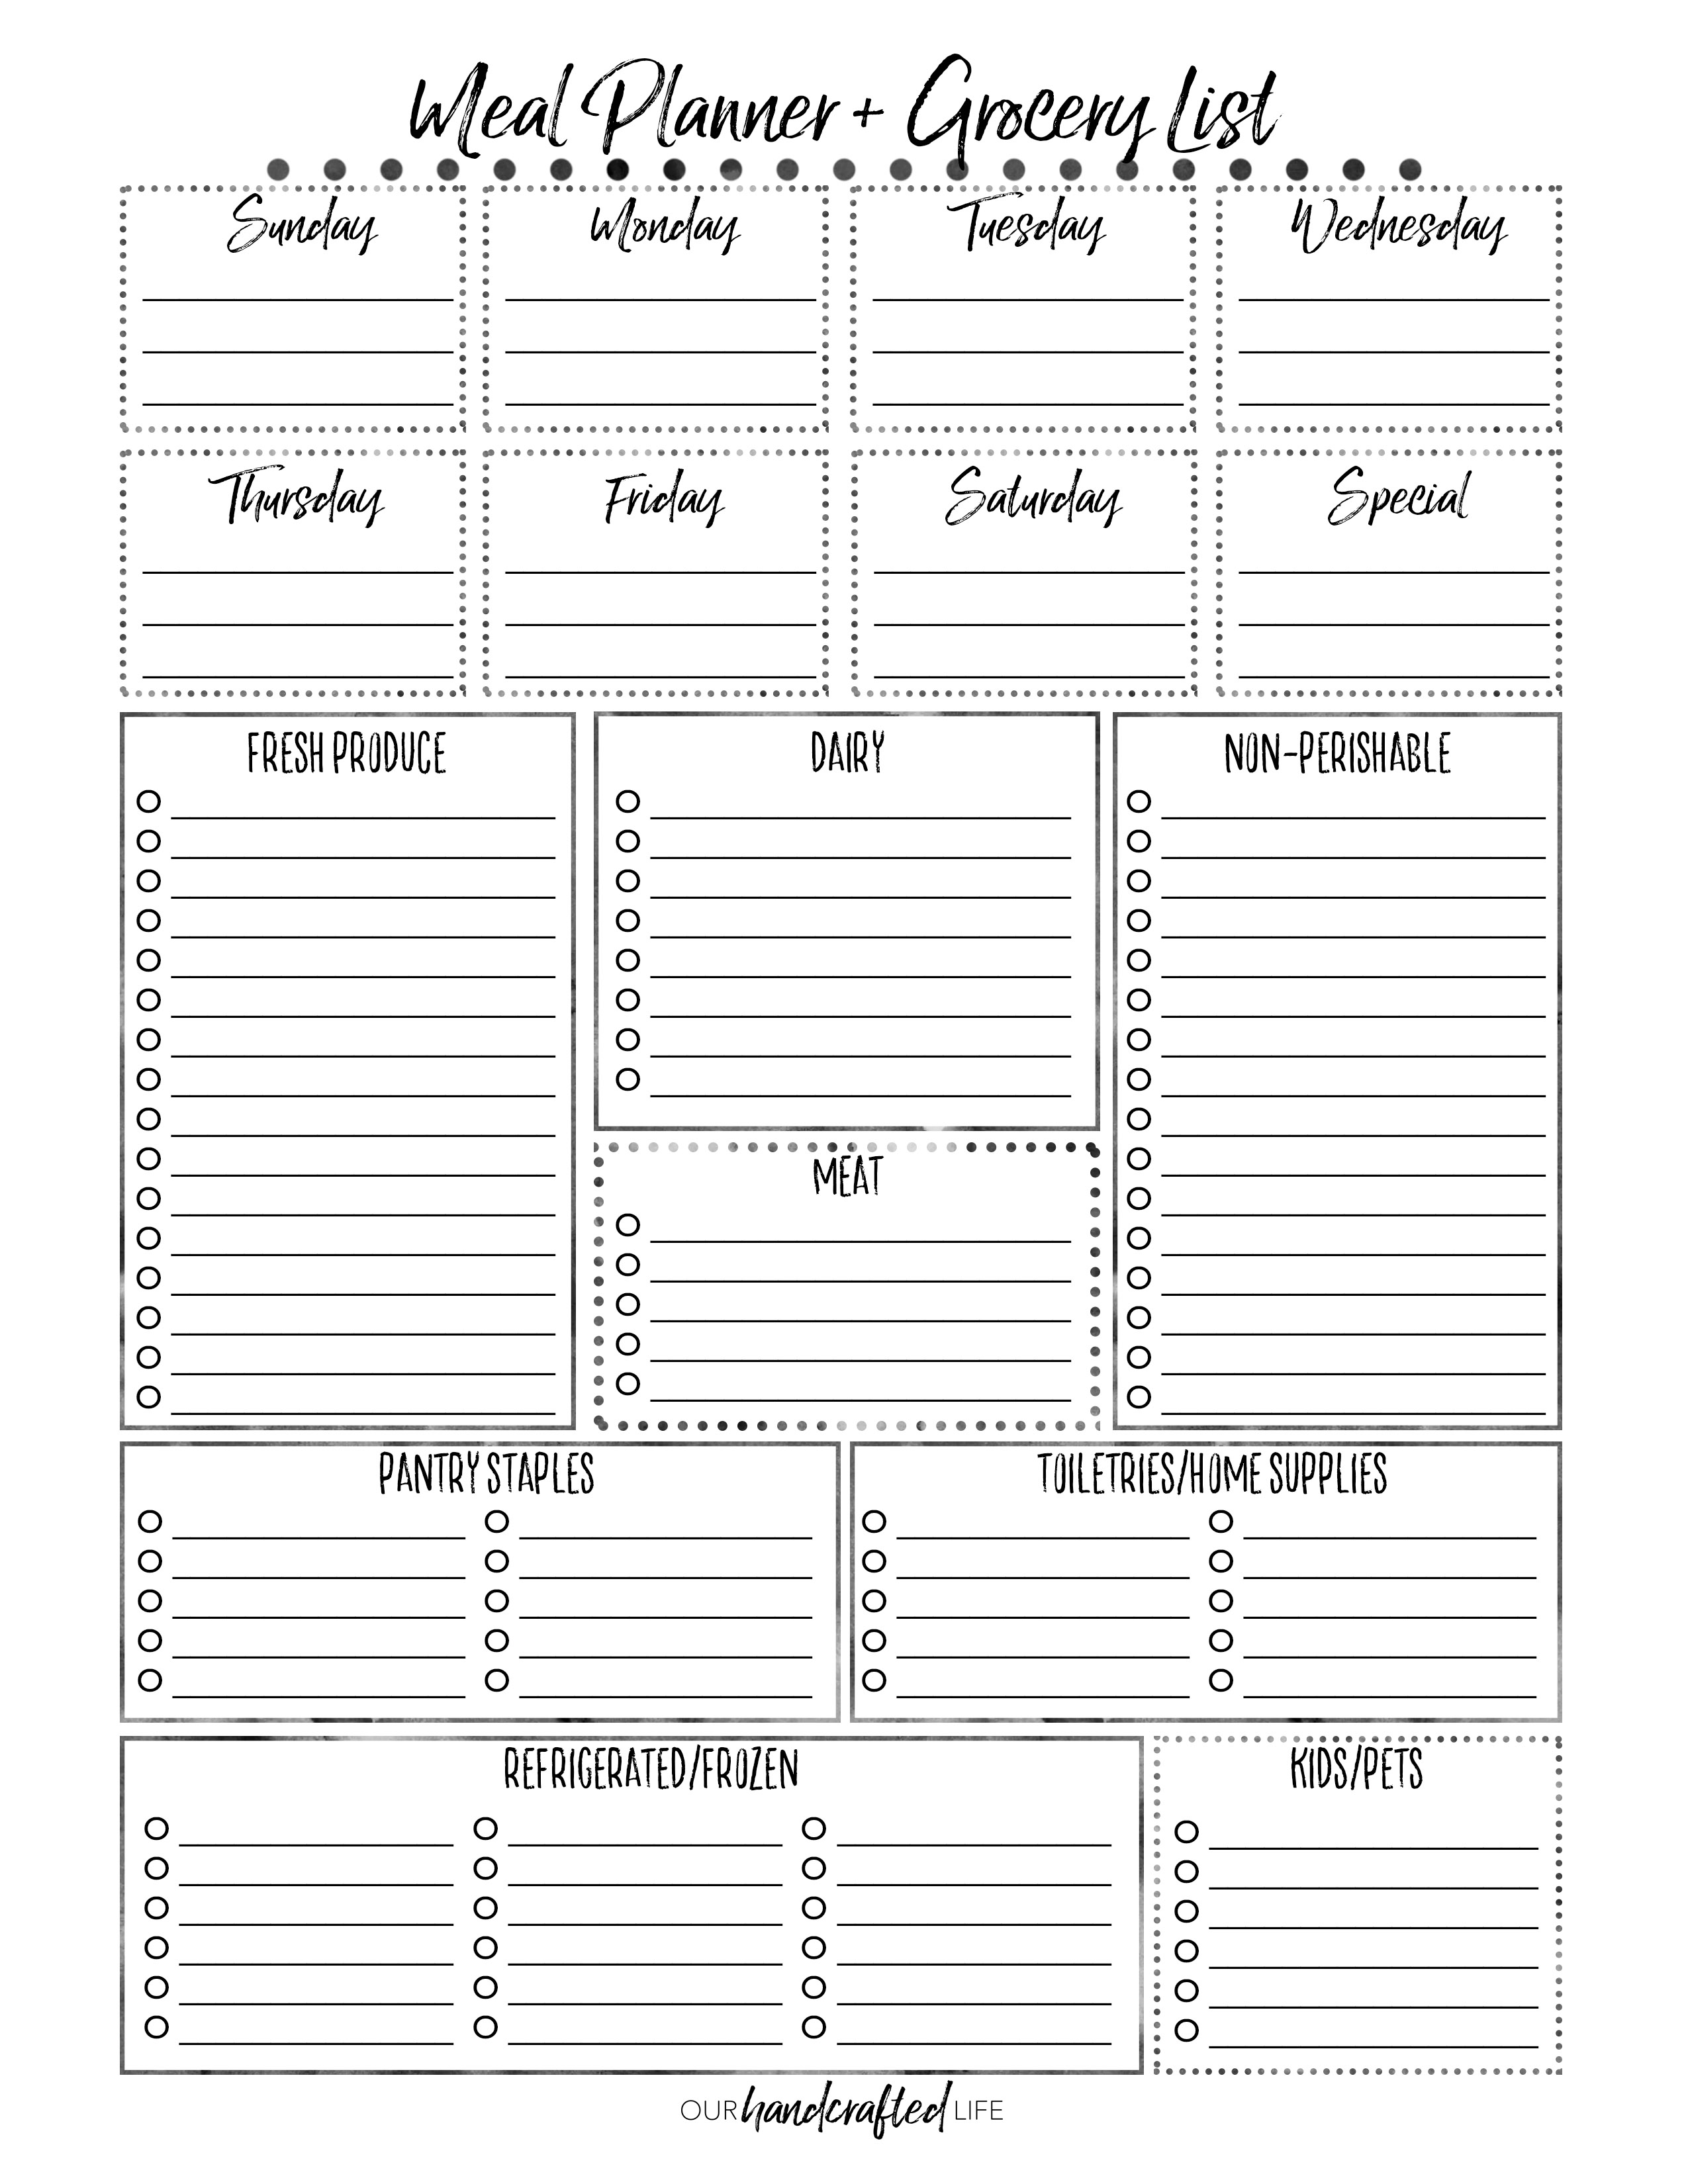 Free Menu Planning Template from ourhandcraftedlife.com